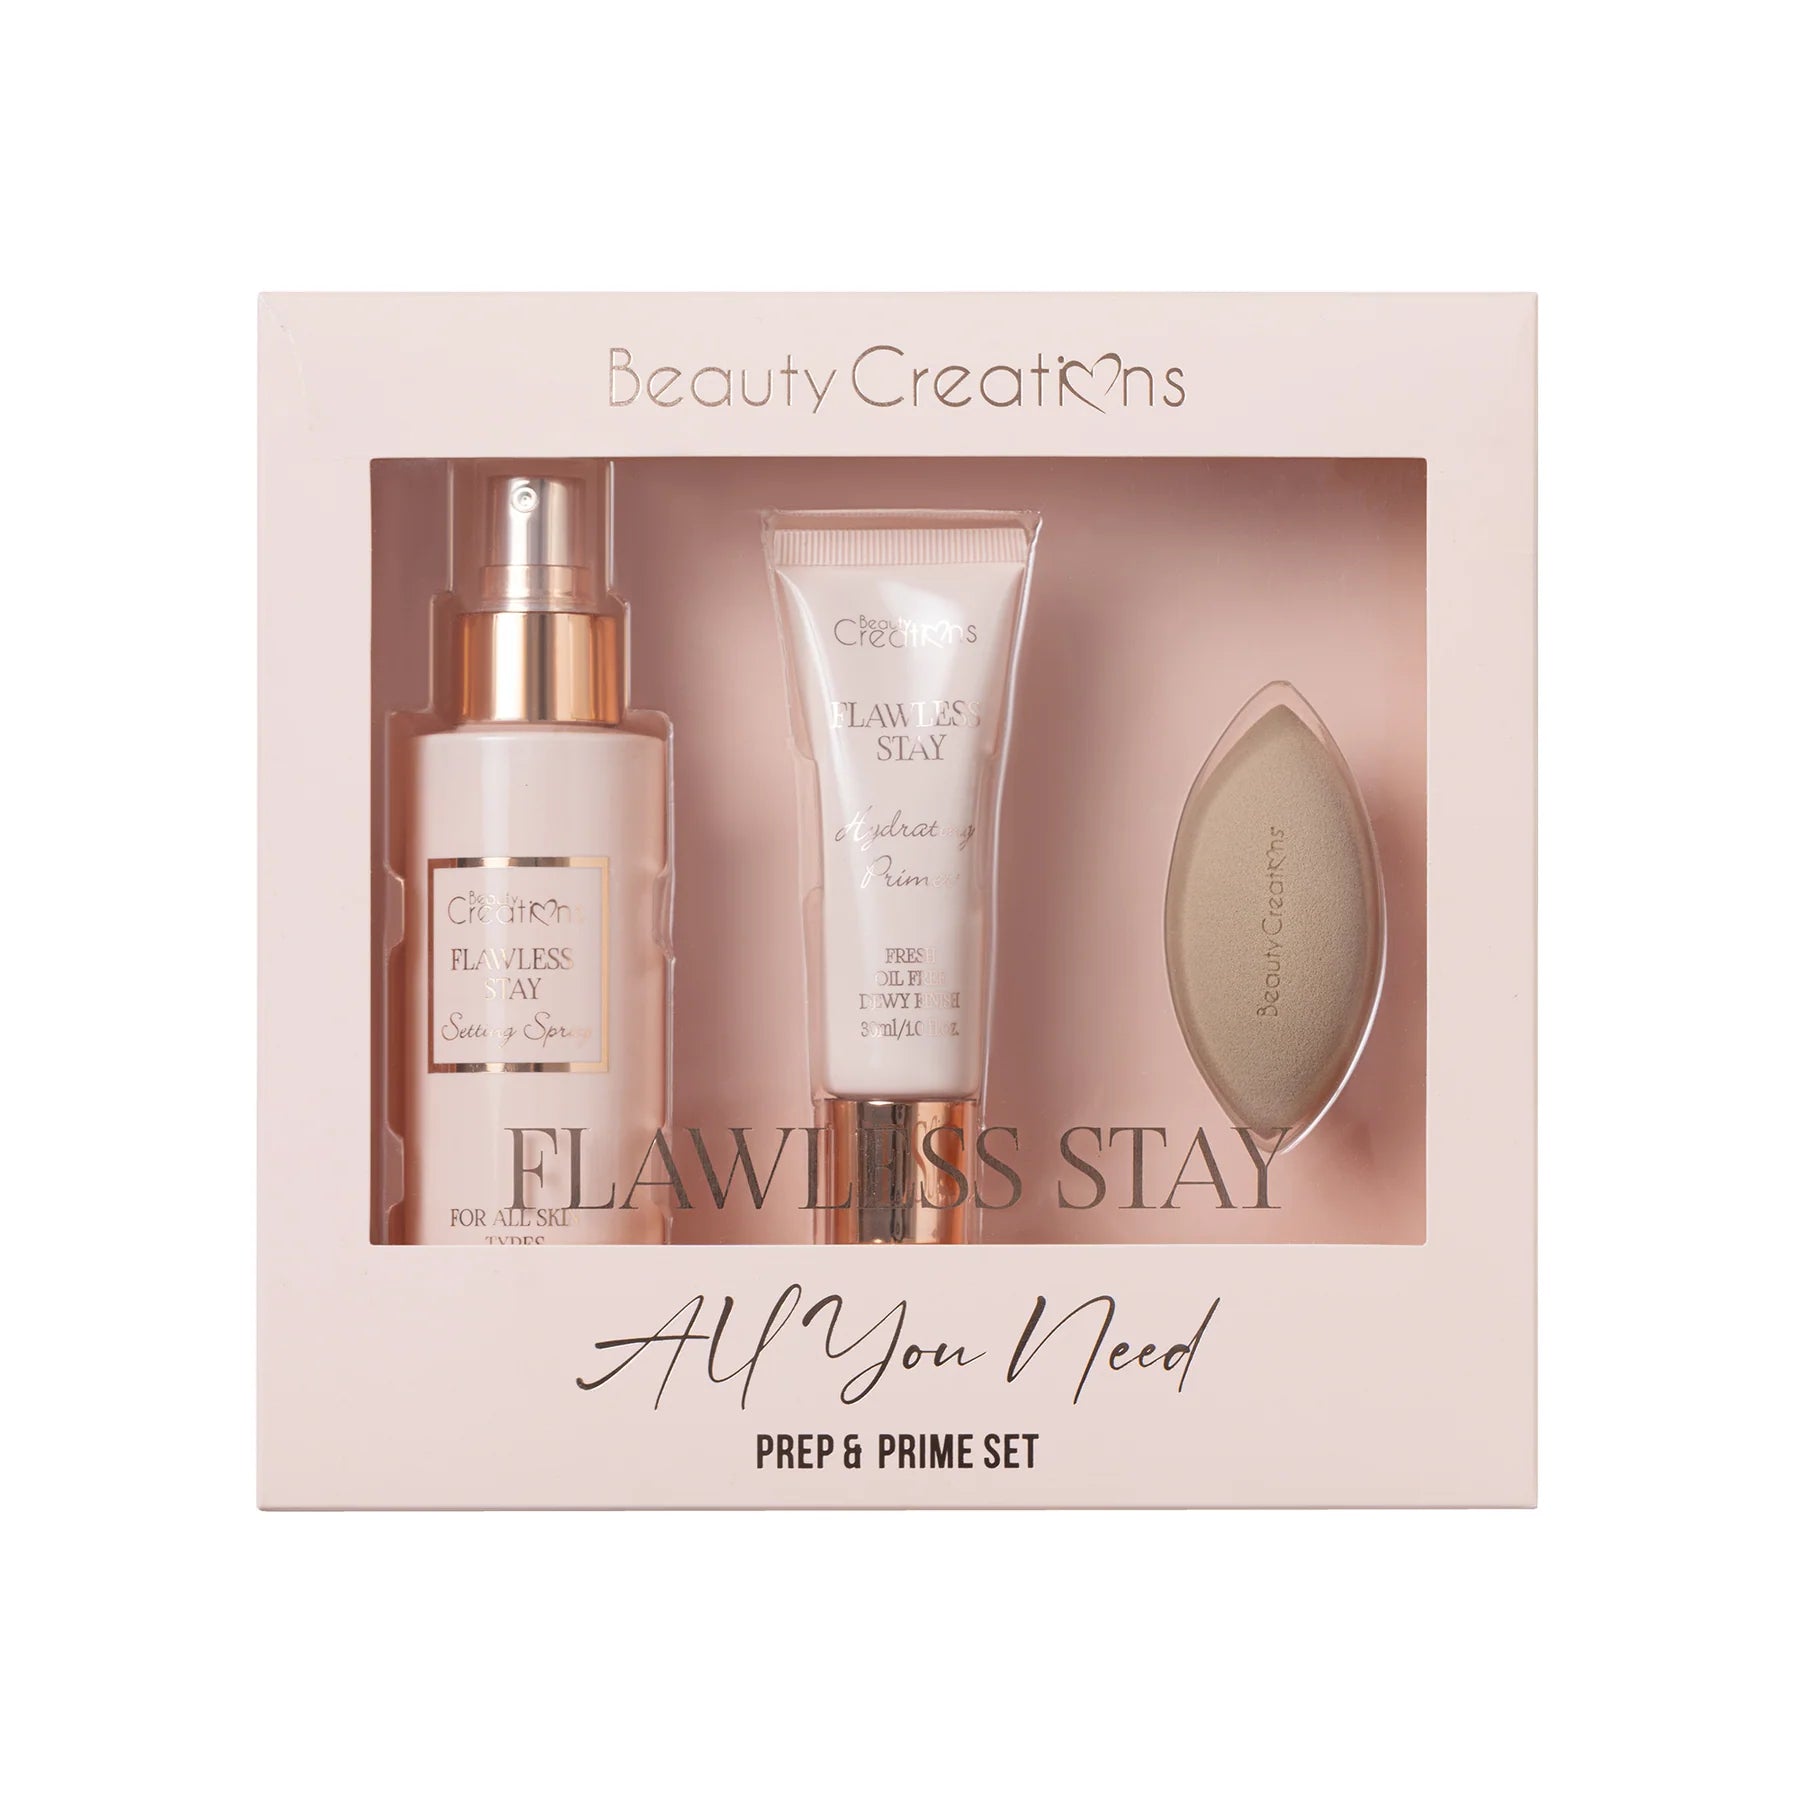 Beauty Creations - Flawless Stay All You Need Prep & Prime Set